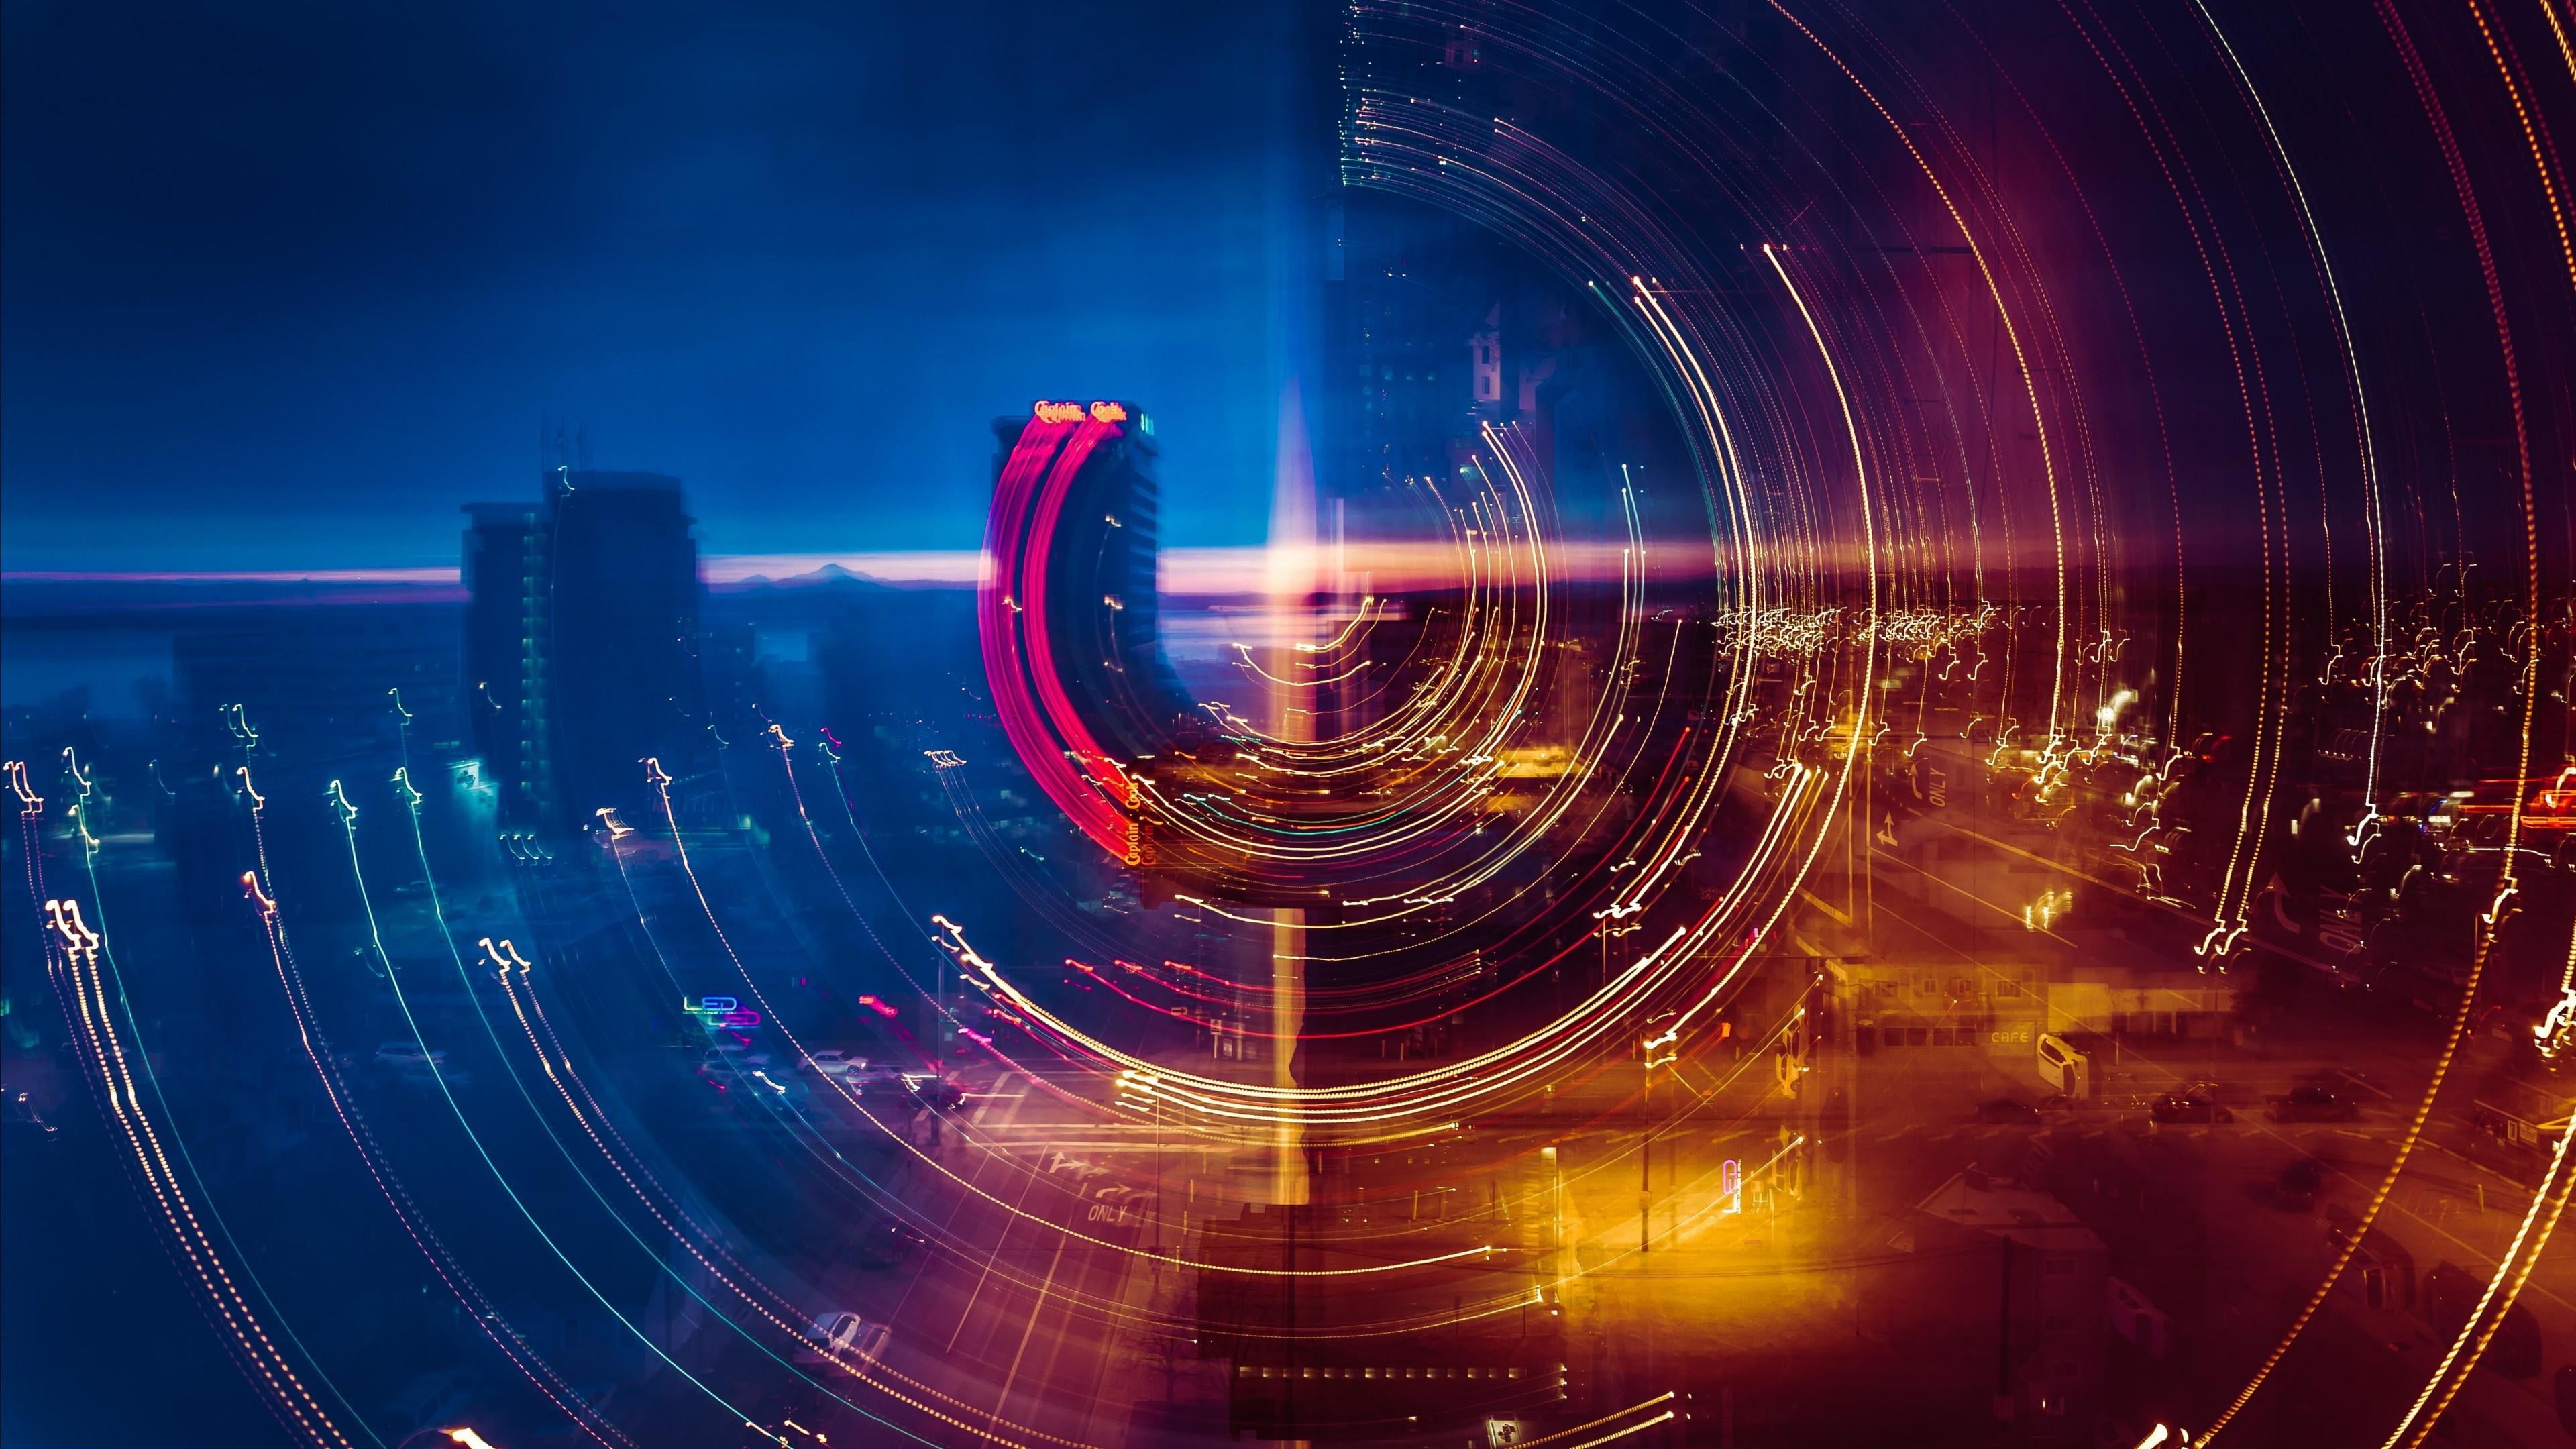 coiling, skyline, circle, special effects, energy, city, night